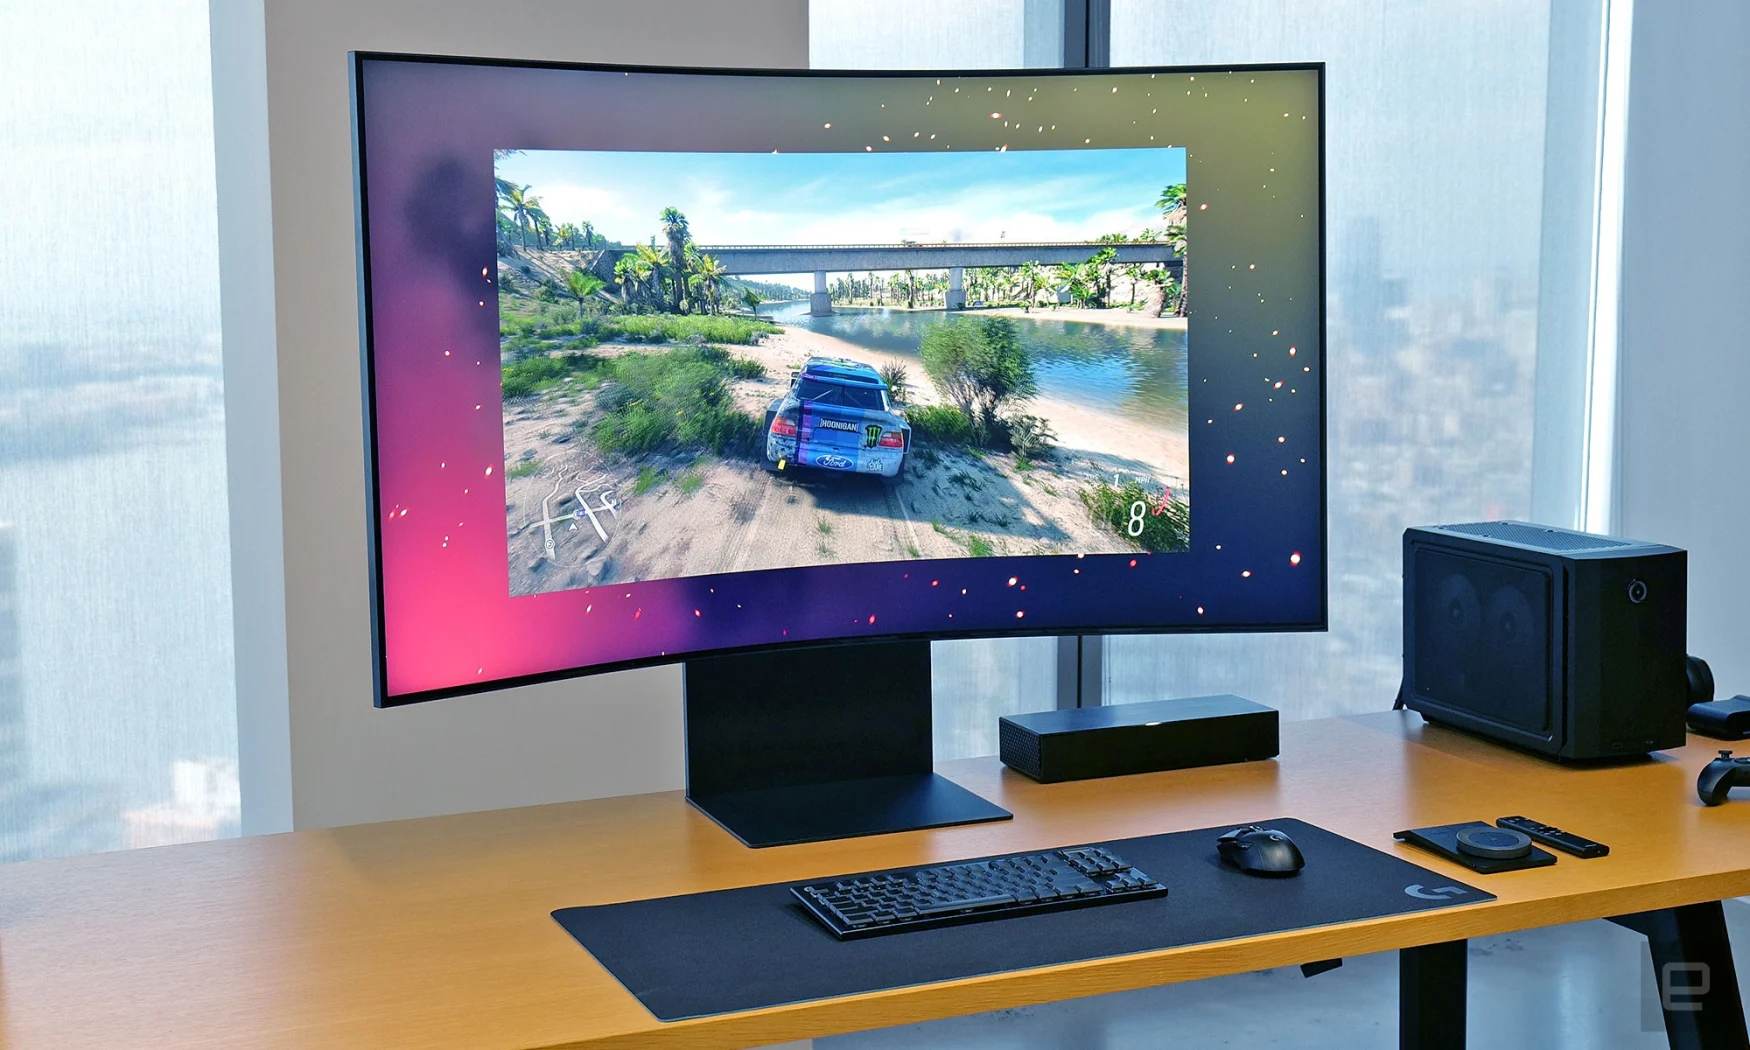 With a large 55-inch 4K display, the Samsung Odyssey Ark is one of the largest gaming monitors on the market. 